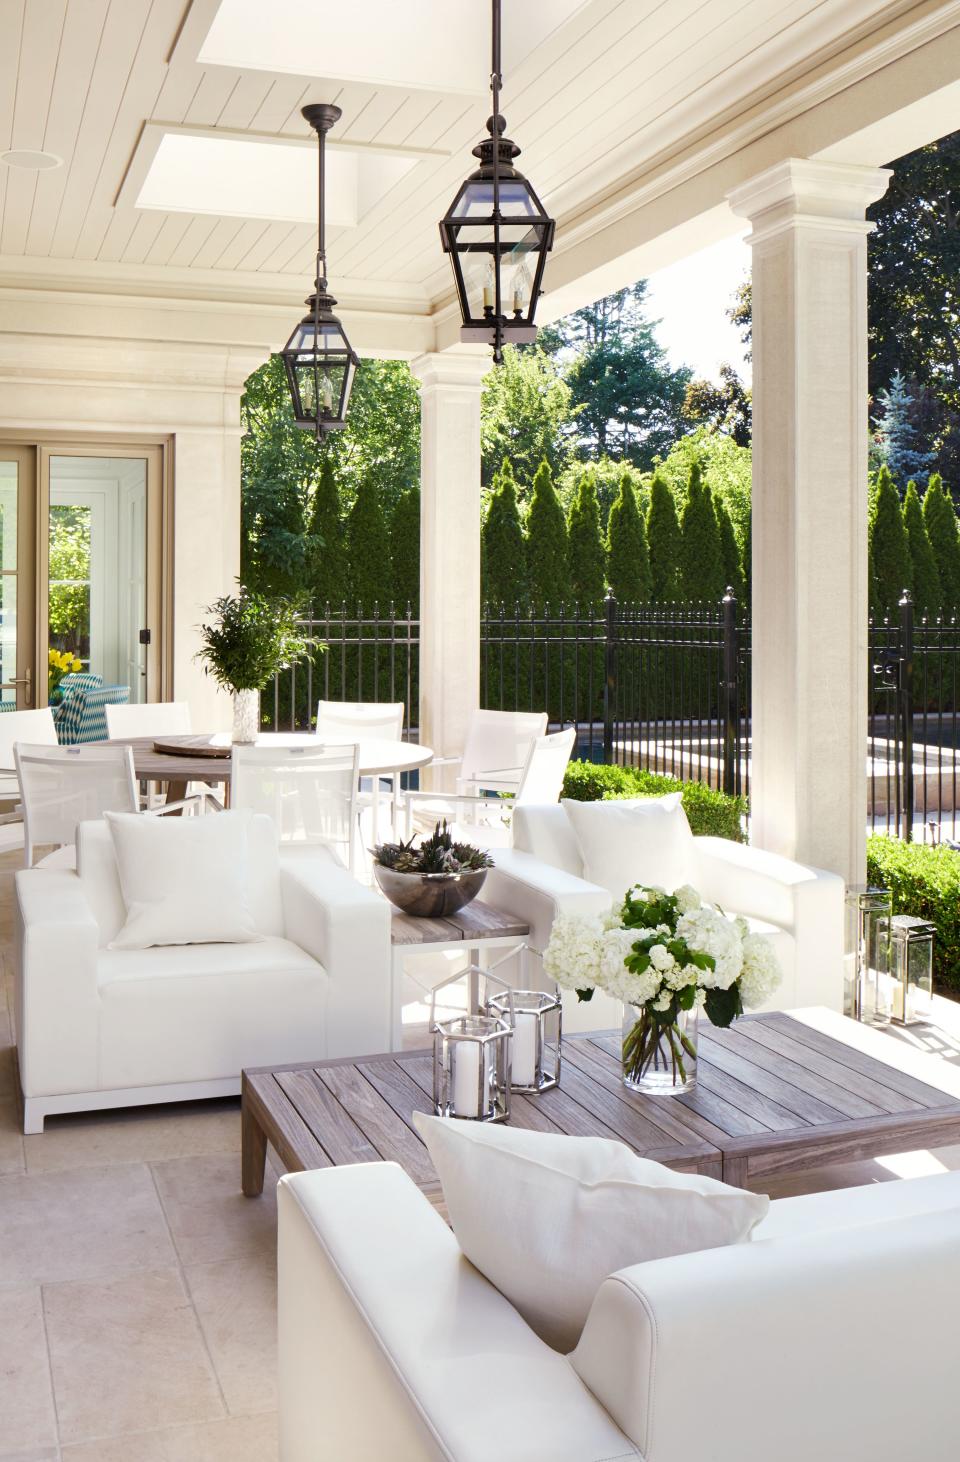 Hepfer chose natural pieces for the backyard loggia, from the travertine tile floors to the simple white chairs by Jardin de Ville, to complement the gorgeous garden views.